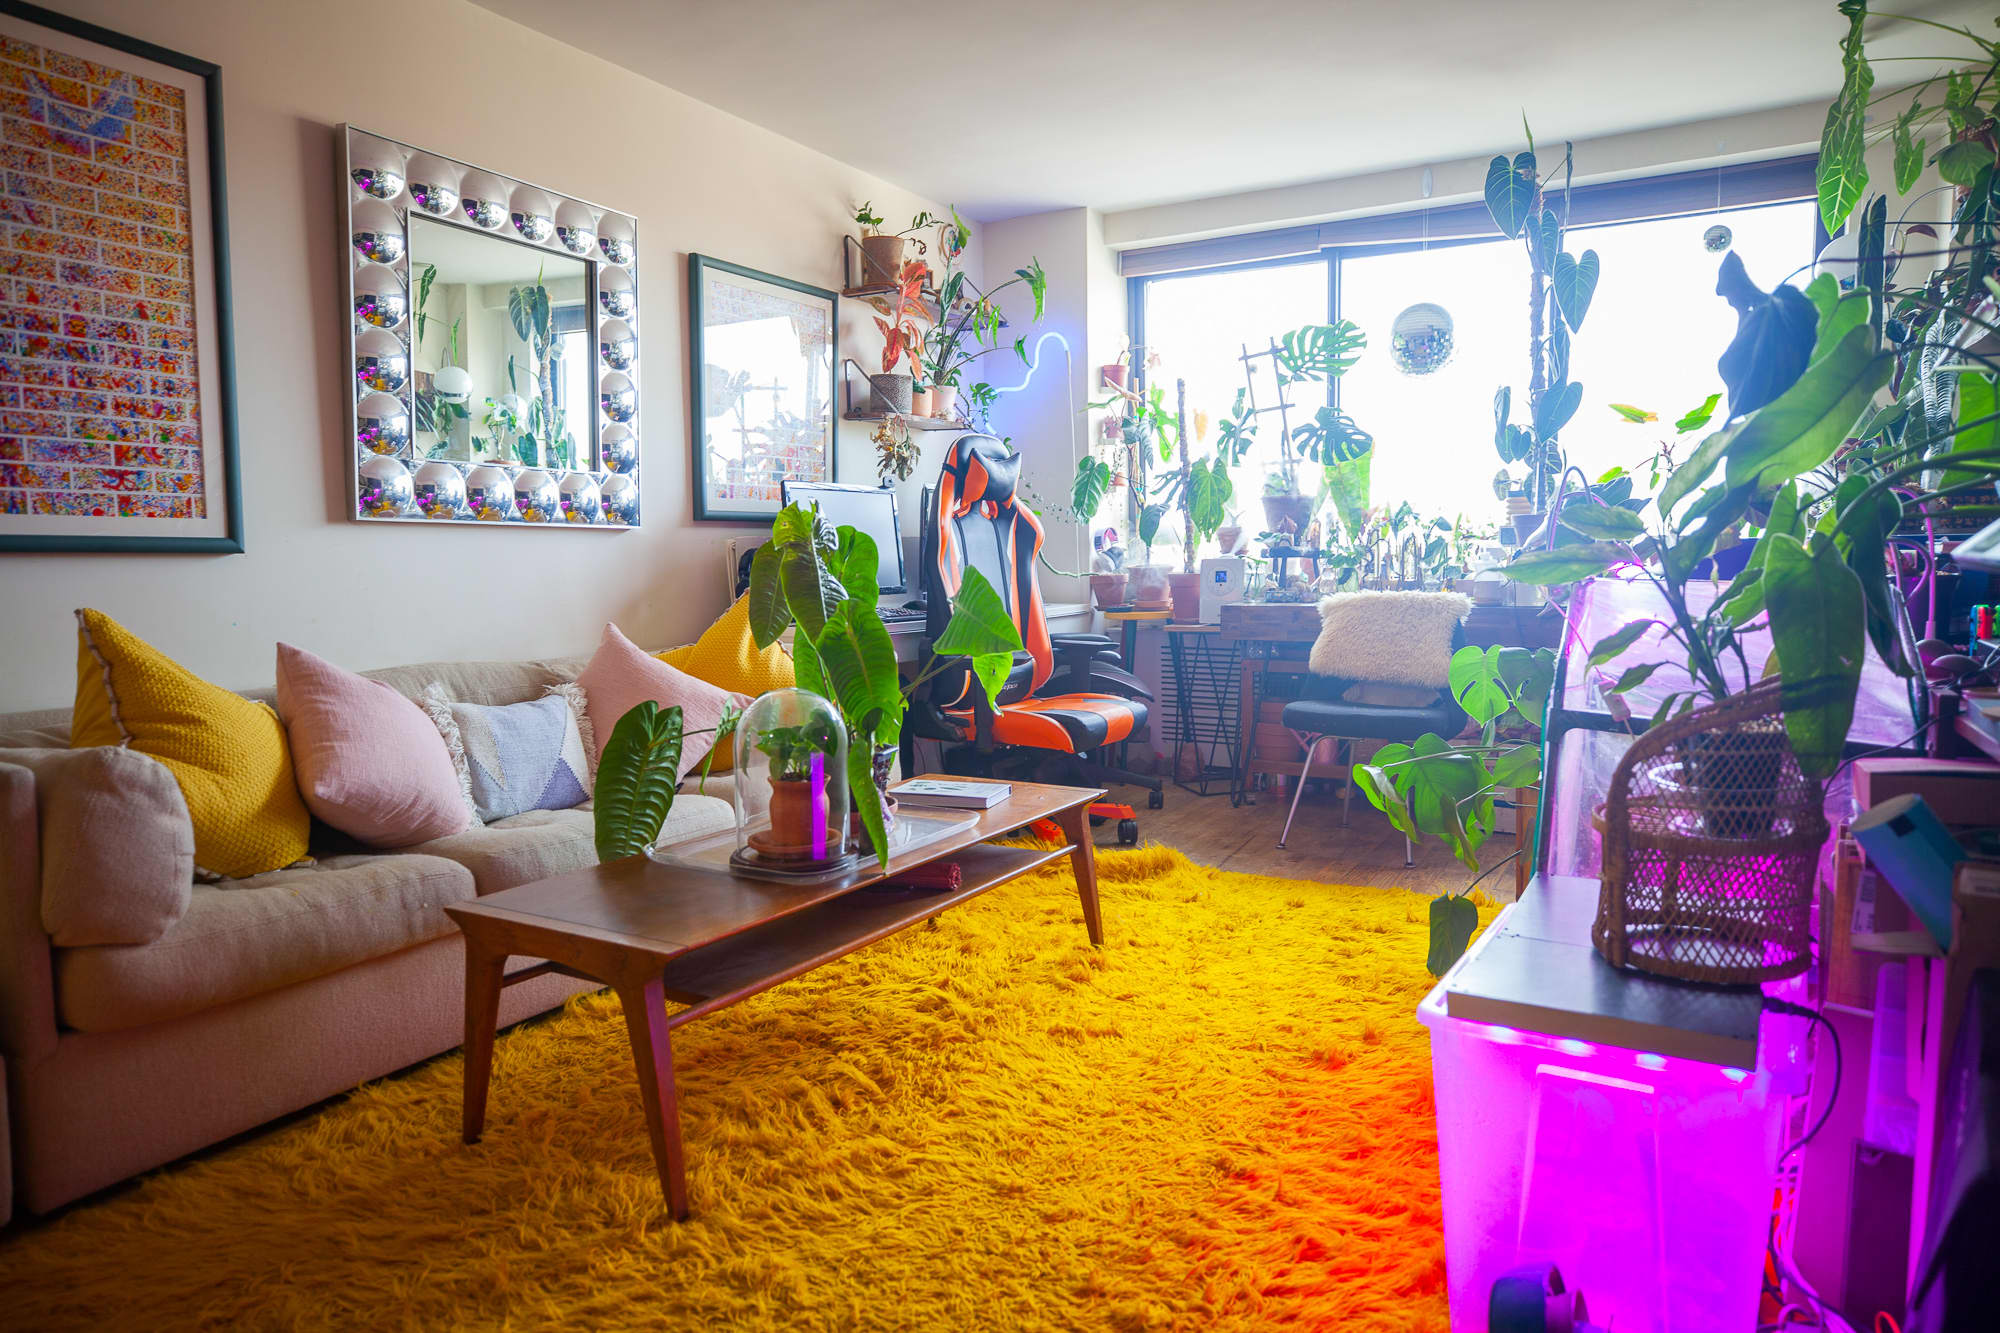 Apartment Botanist Alessia Resta Plants and Home Photos | Apartment Therapy